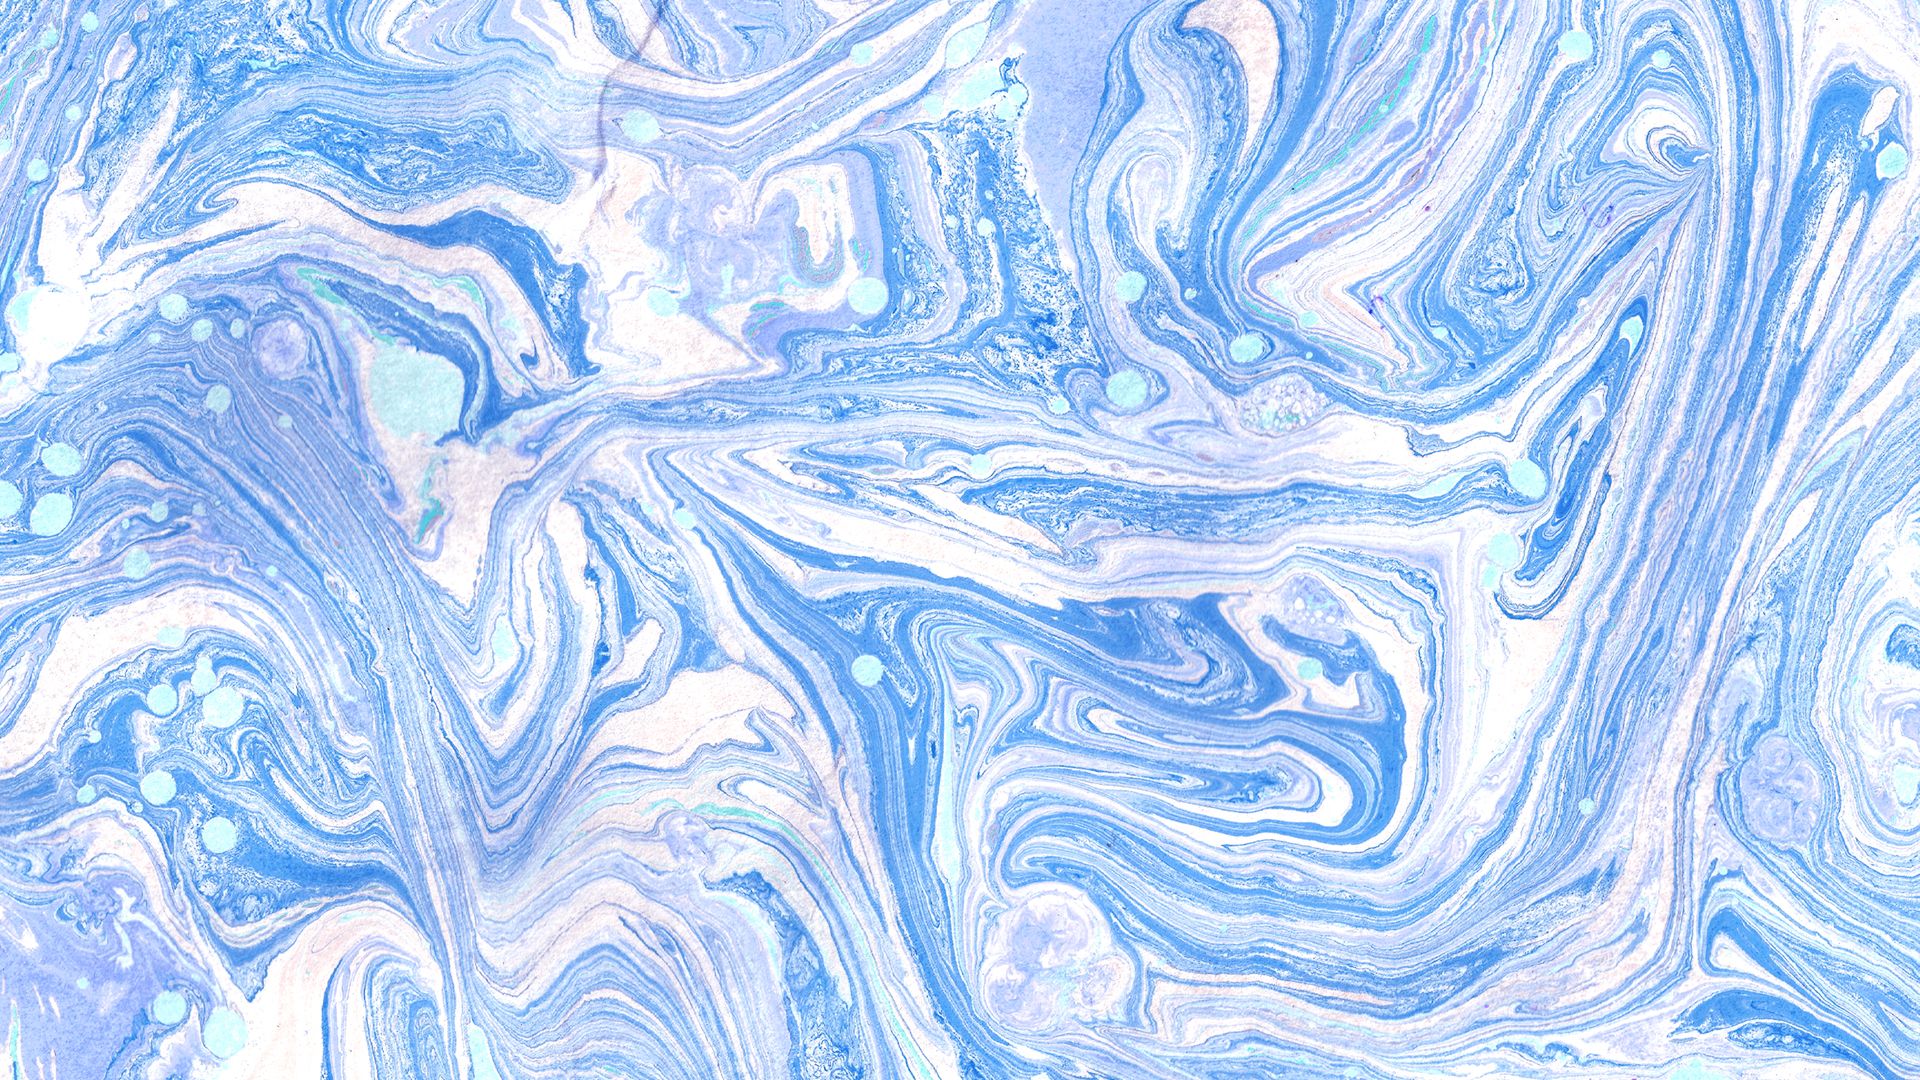 A blue and white marbled background - Marble